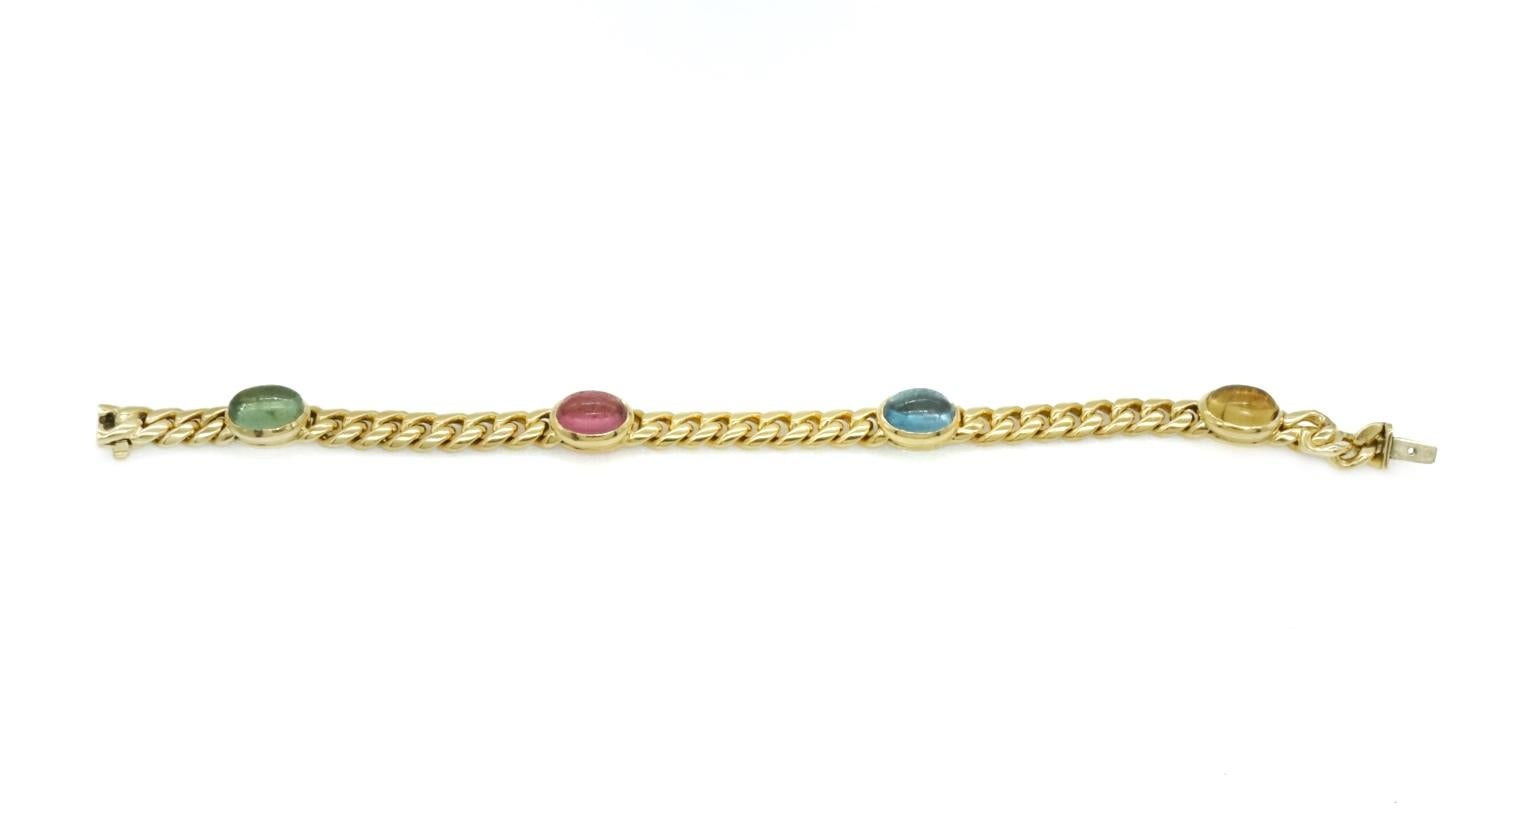 Bulgari 18 karat yellow gold curb link chain bracelet with multi-color stones (tourmalines, topaz, citrines). Made in Italy, circa 1980.